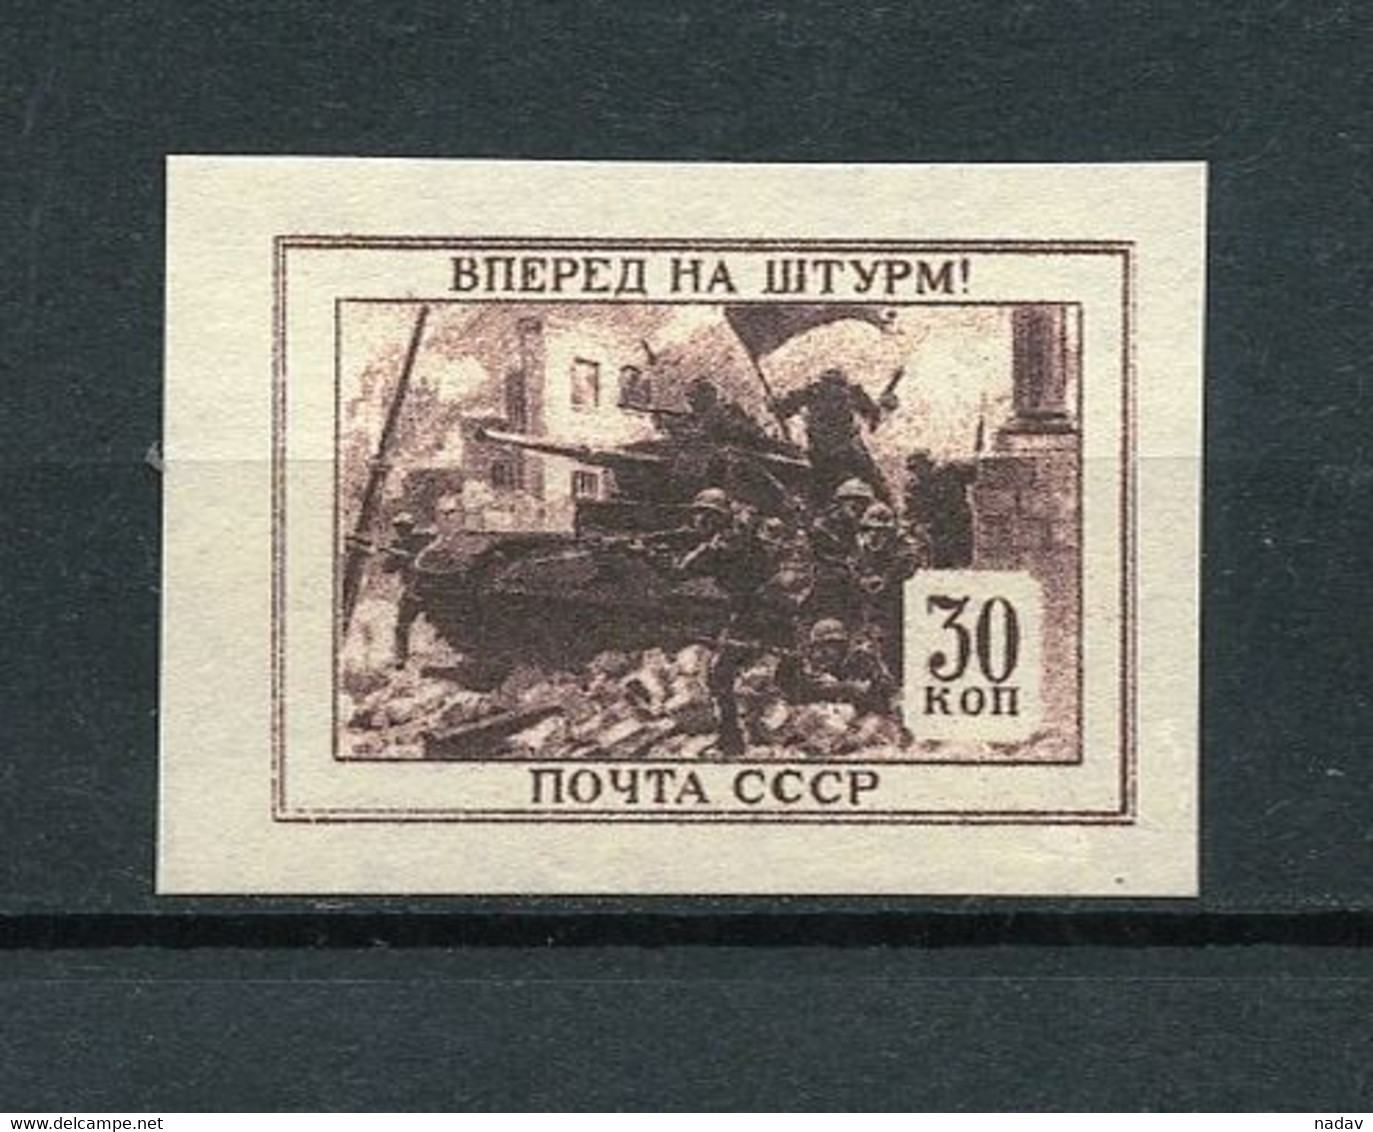 Russia & USSR-1945- Proof  Imperforate, Reproduction - MNH** -(119) - Proofs & Reprints